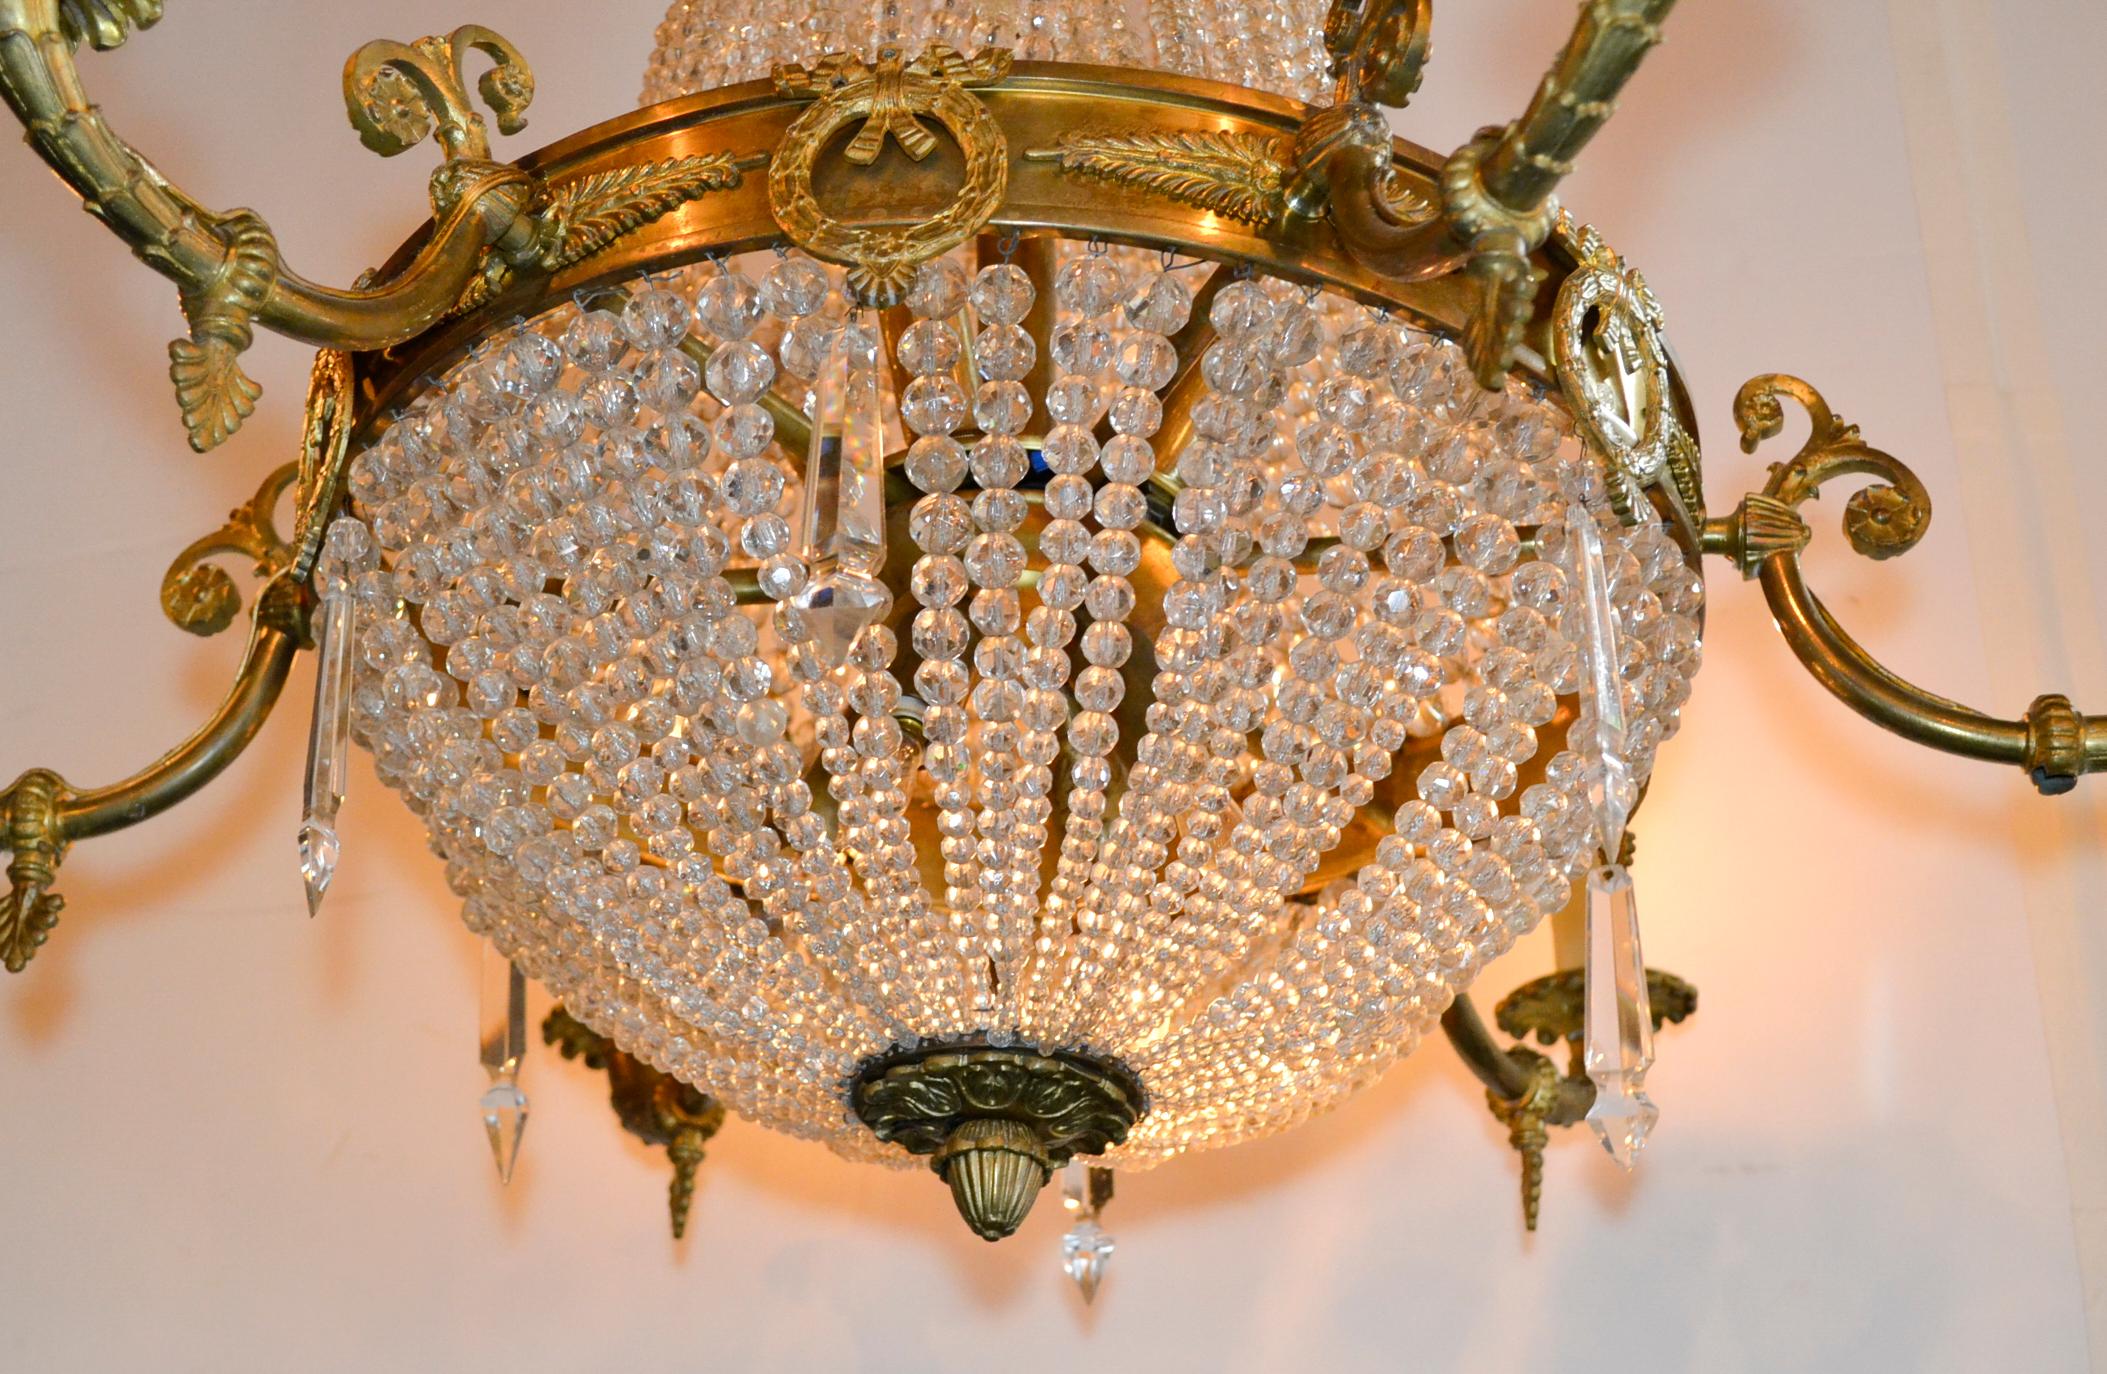 Lovely 19th century French gilt bronze 6-light basket chandelier. Beautiful gilt and sparkling crystals make this fixture extra special.  Gorgeous!!